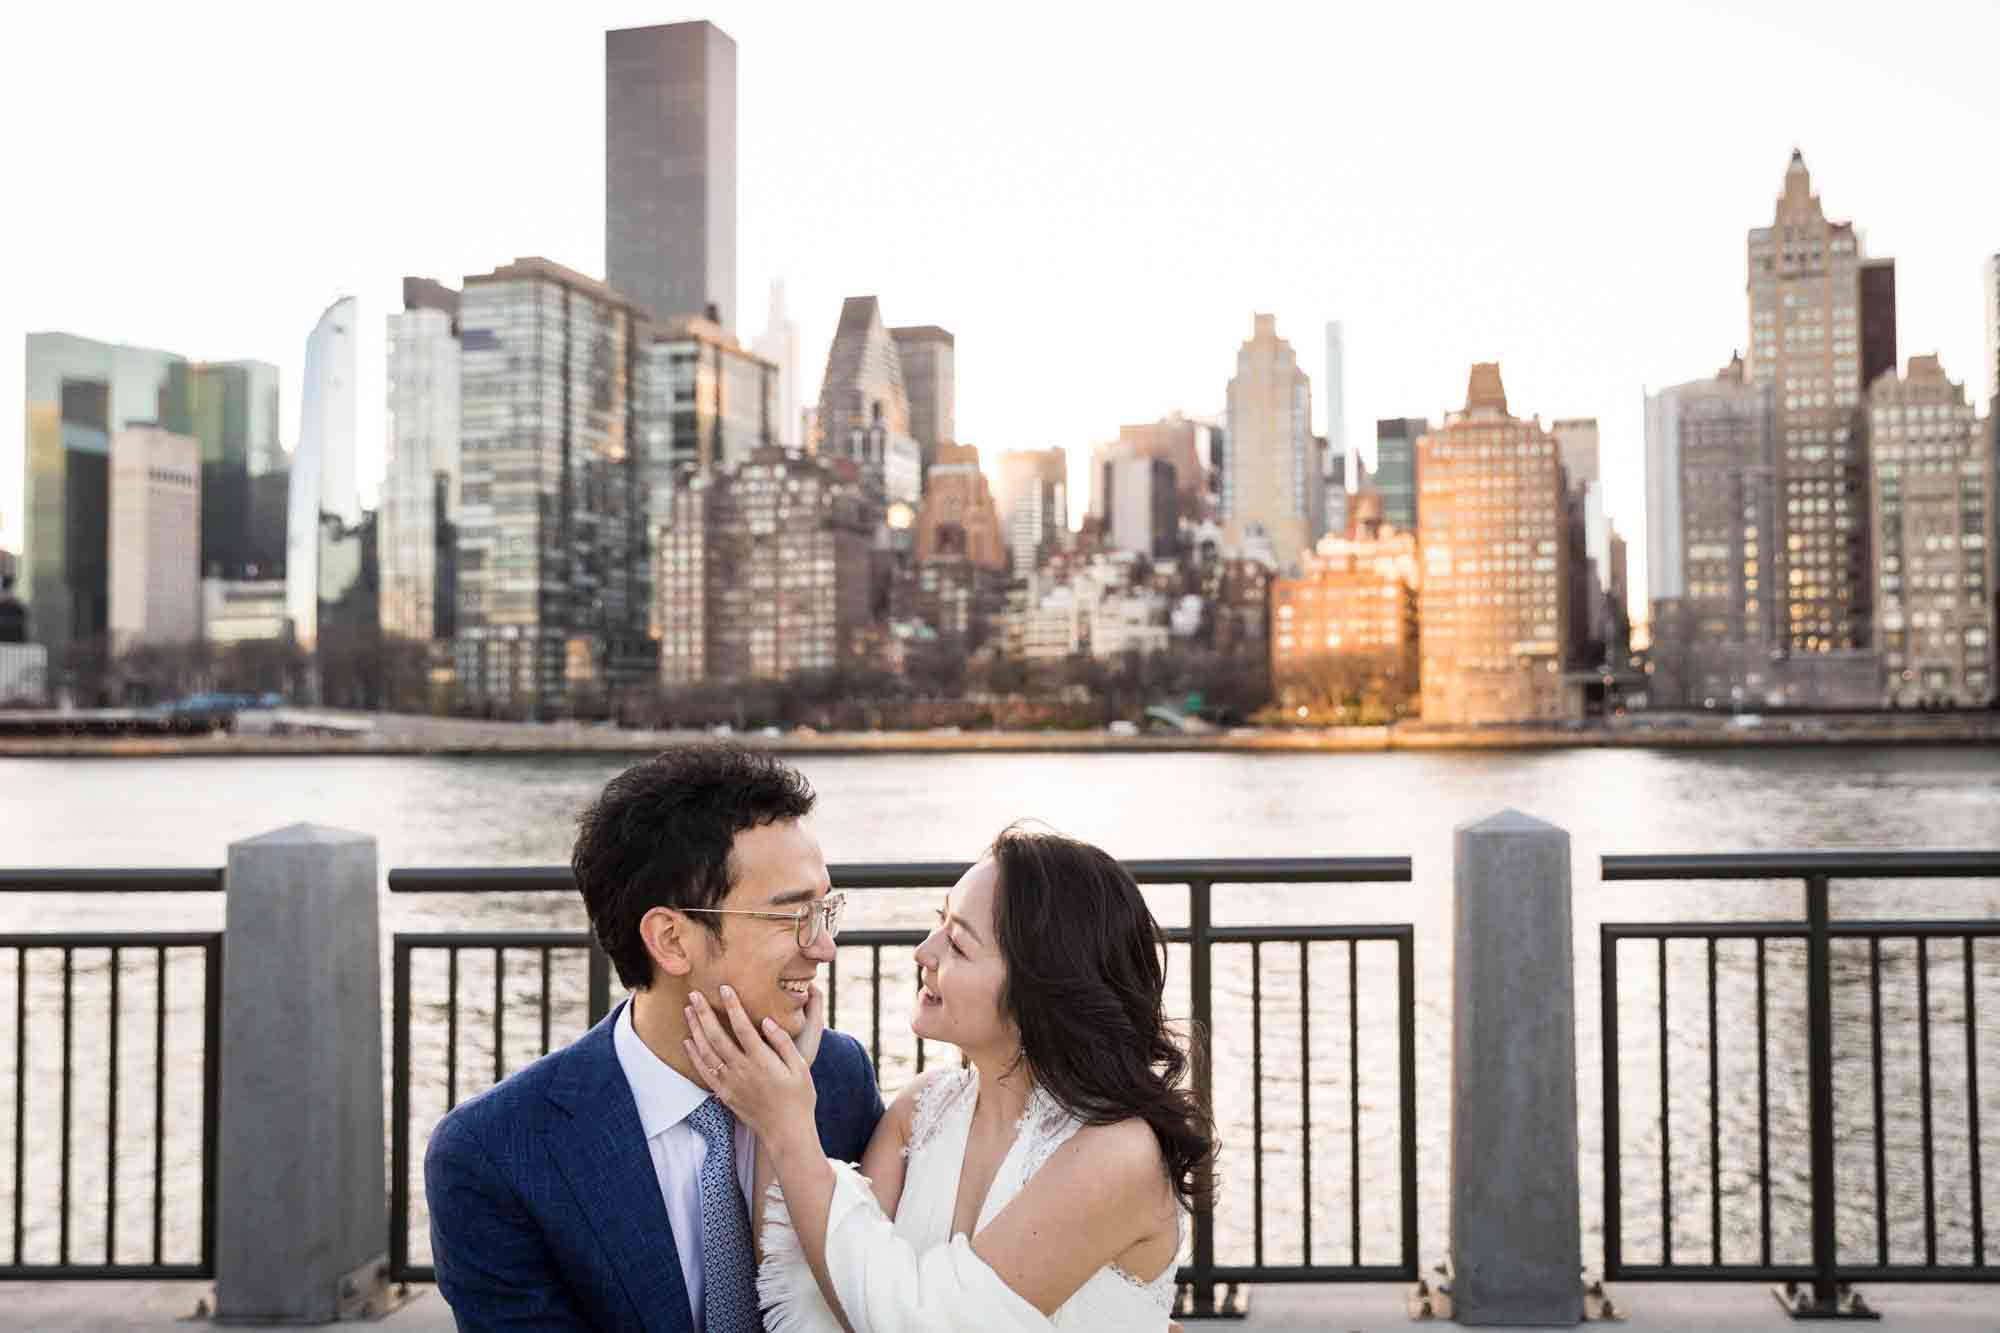 Roosevelt Island engagement photos of couple sitting on bench with woman touching man's face in front of NYC skyline